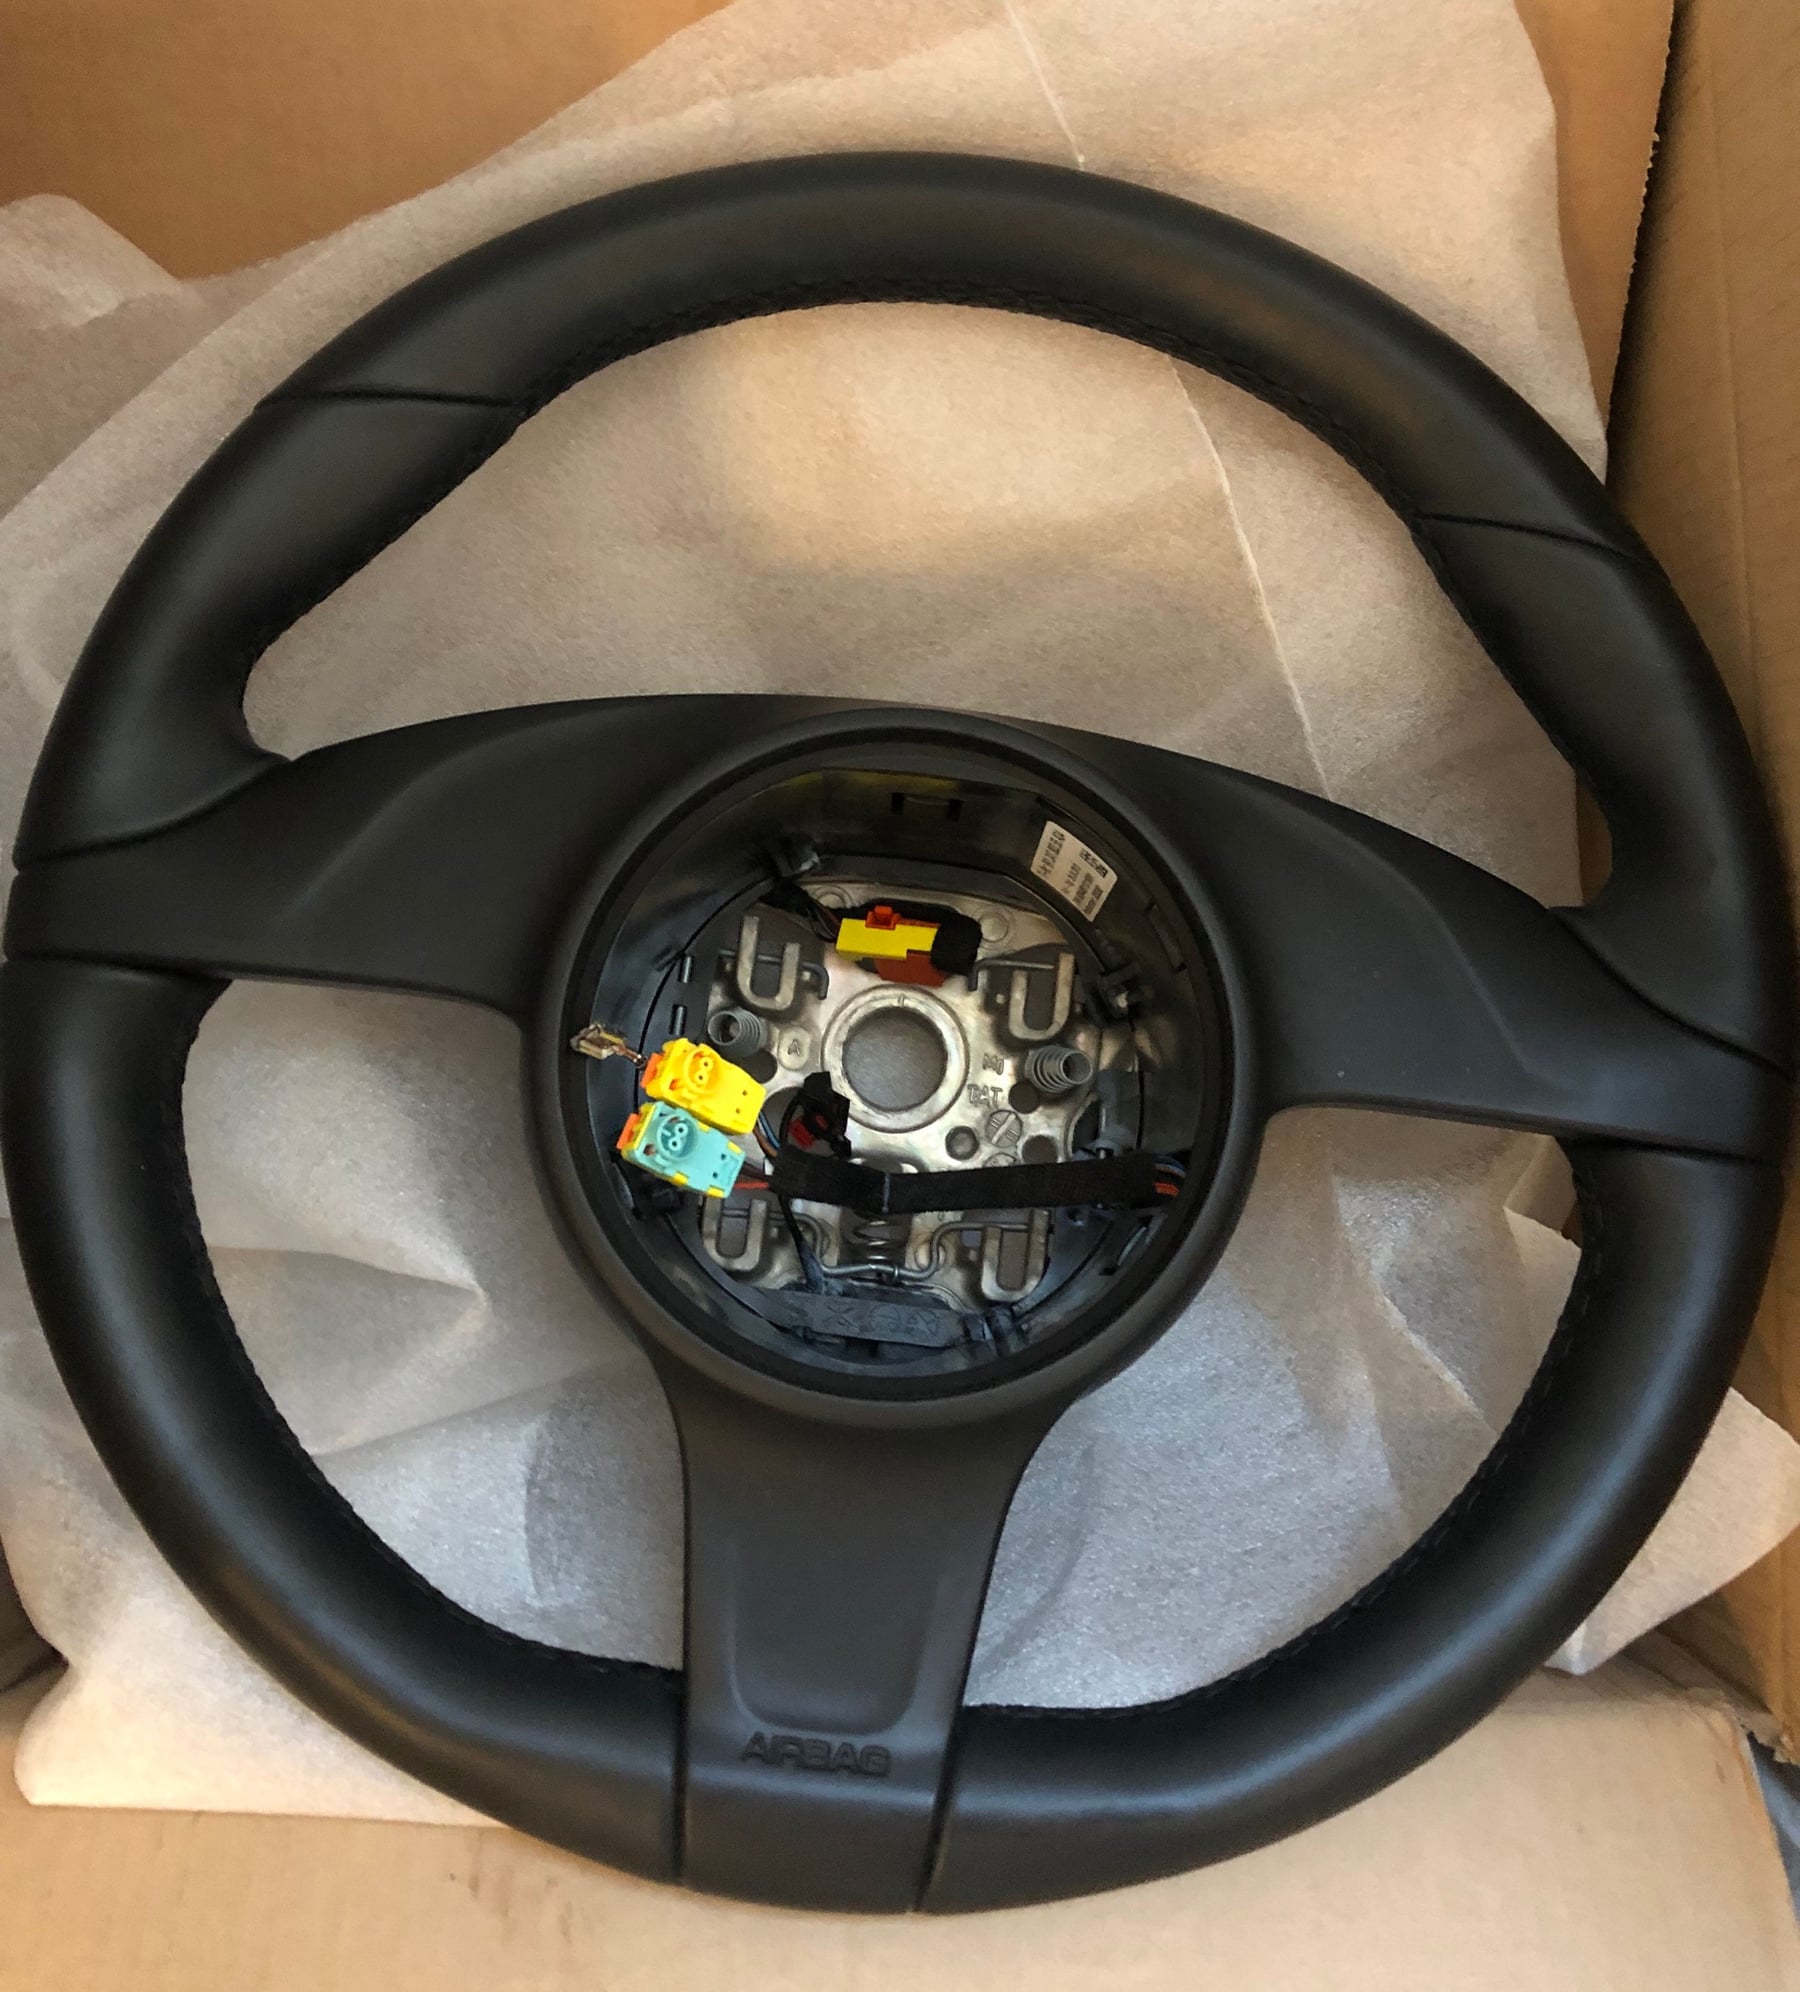 Interior/Upholstery - 2013 Carrera S Leather Heated Steering Wheel and Module - Manual Transmission - Used - 2012 to 2016 Porsche Carrera - Marietta, GA 30062, United States